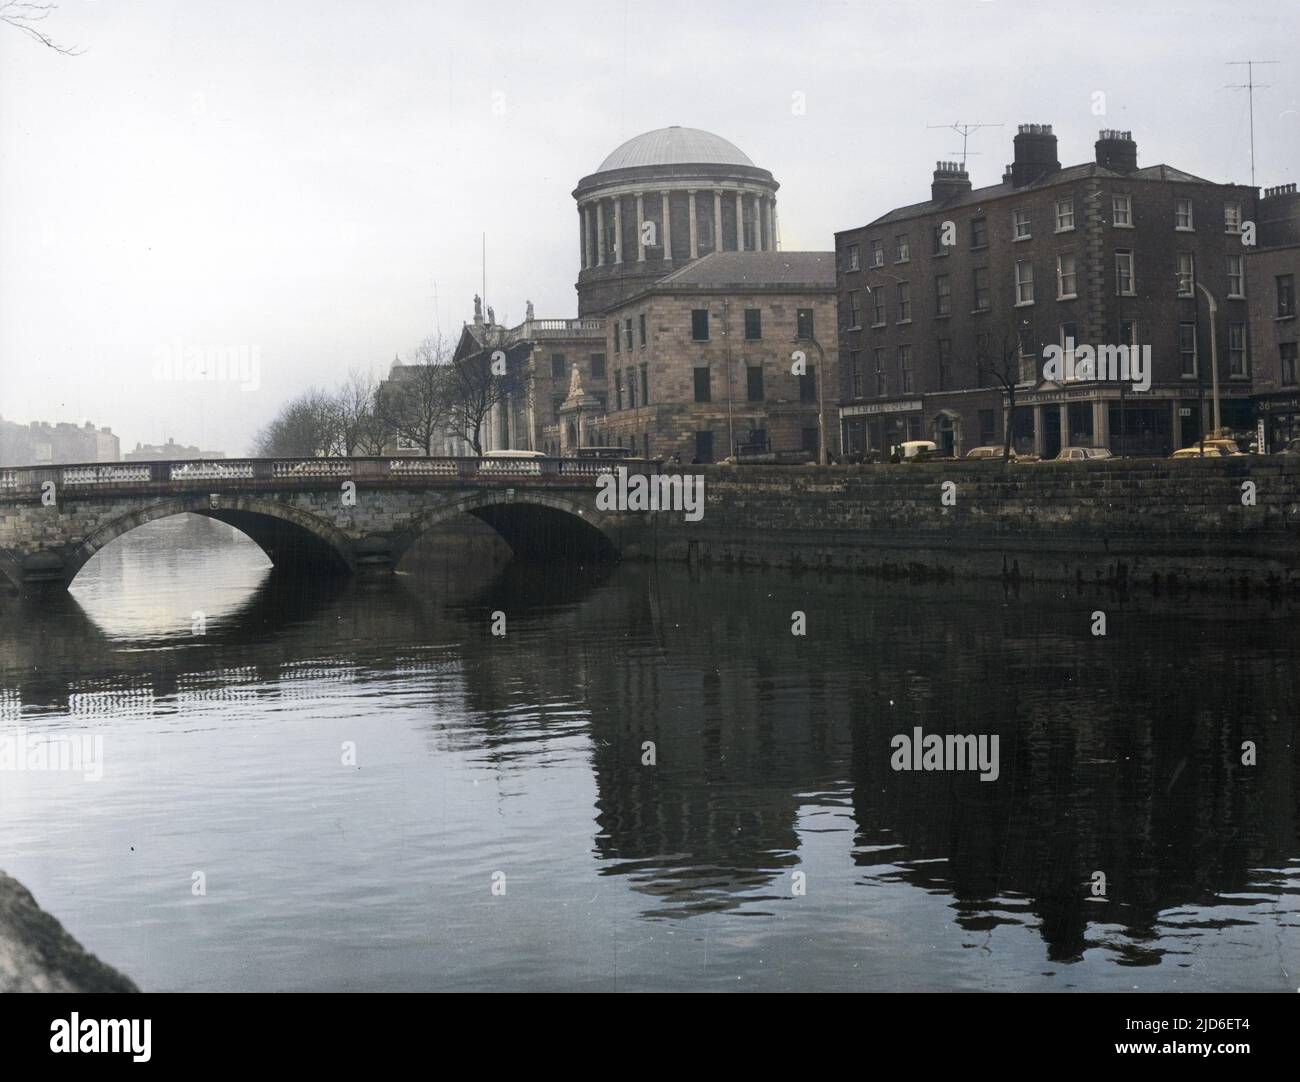 The Four Courts, home of the Irish Law Courts, by the River Liffey, Dublin, Co Dublin, Ireland. Colourised version of : 10161320       Date: 1960s Stock Photo